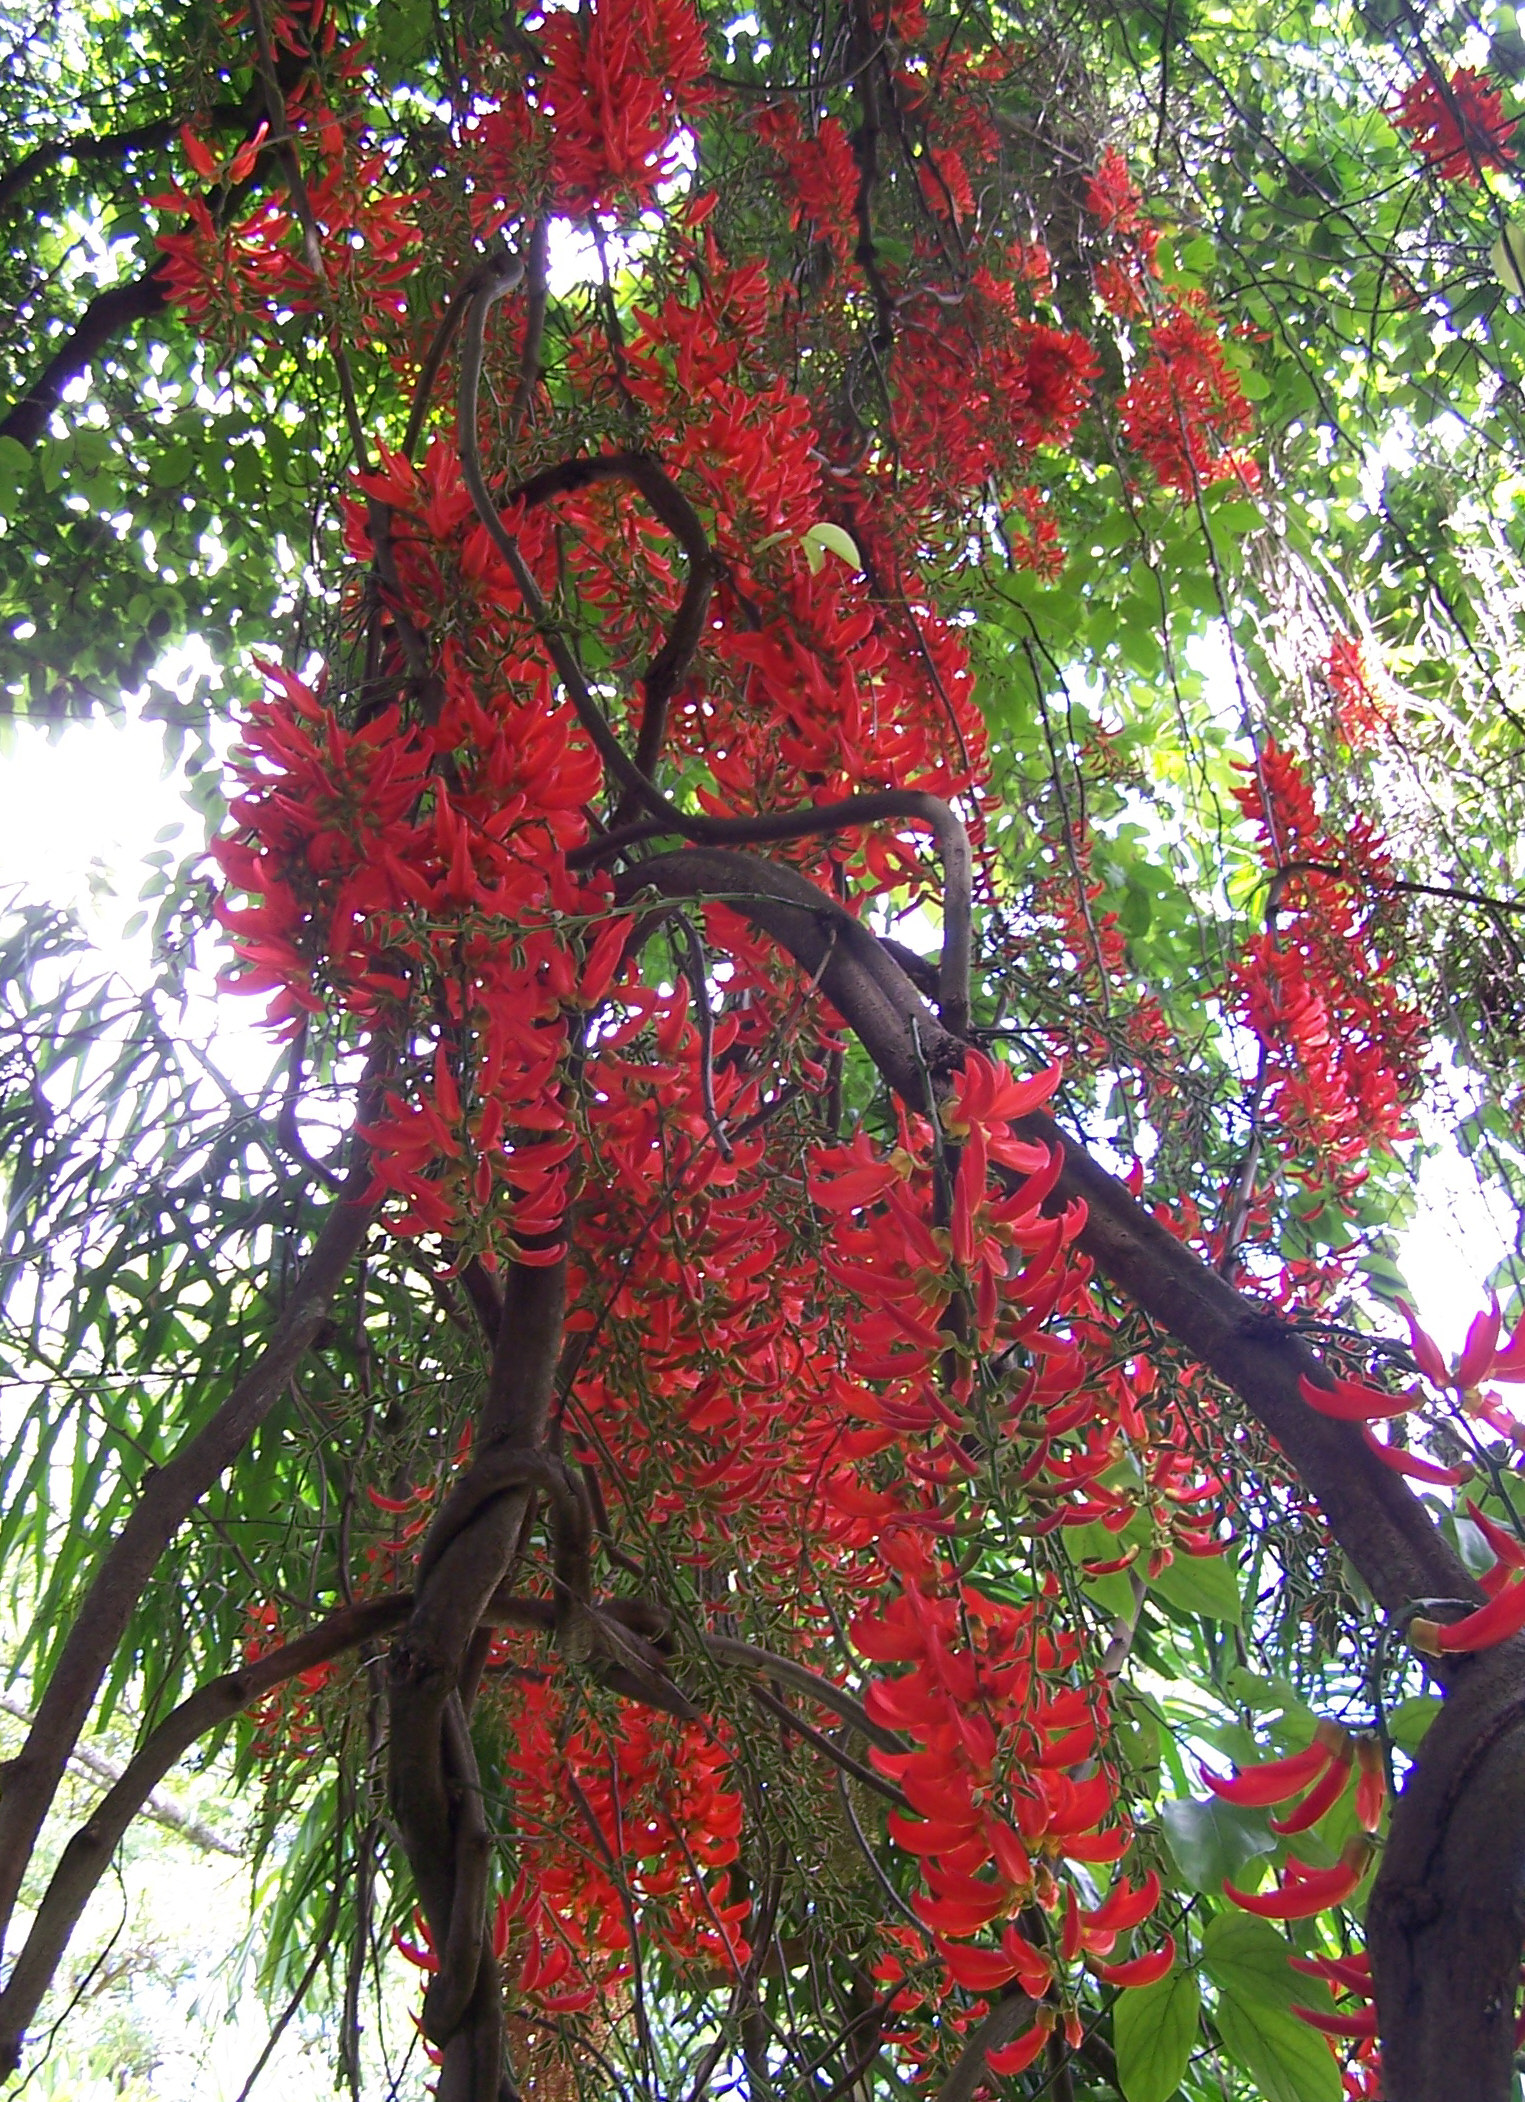 a tree with red flowers is shown in the foreground